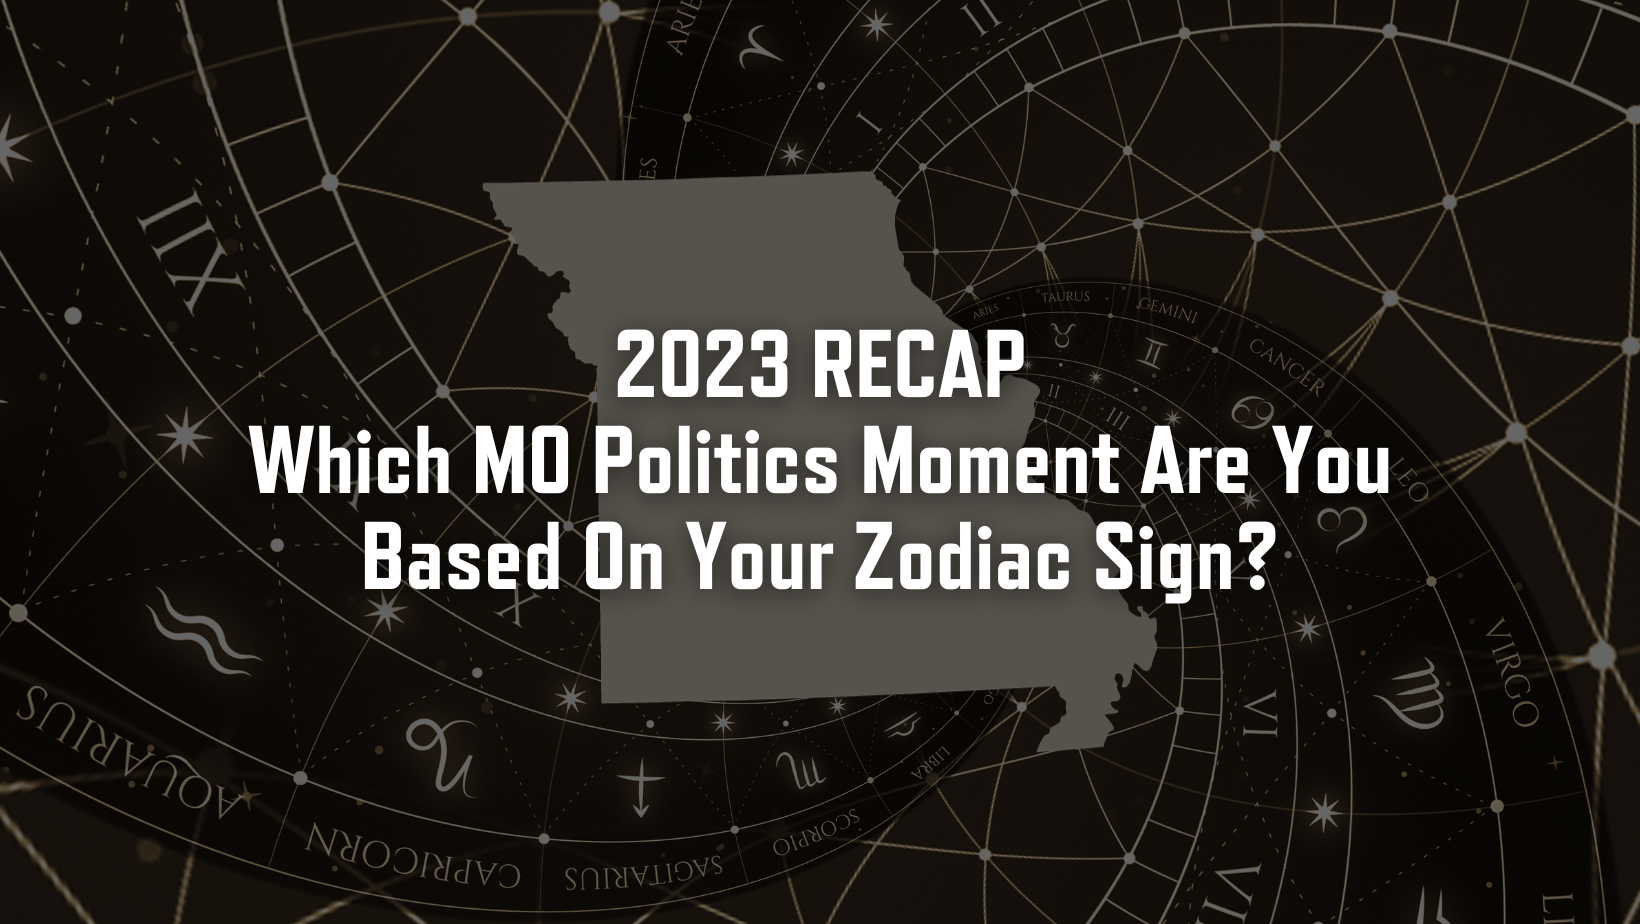 2023 Recap: Which MO Politics Moment Are You Based On Your Zodiac Sign? over a zodiac themed background and MO state shape.